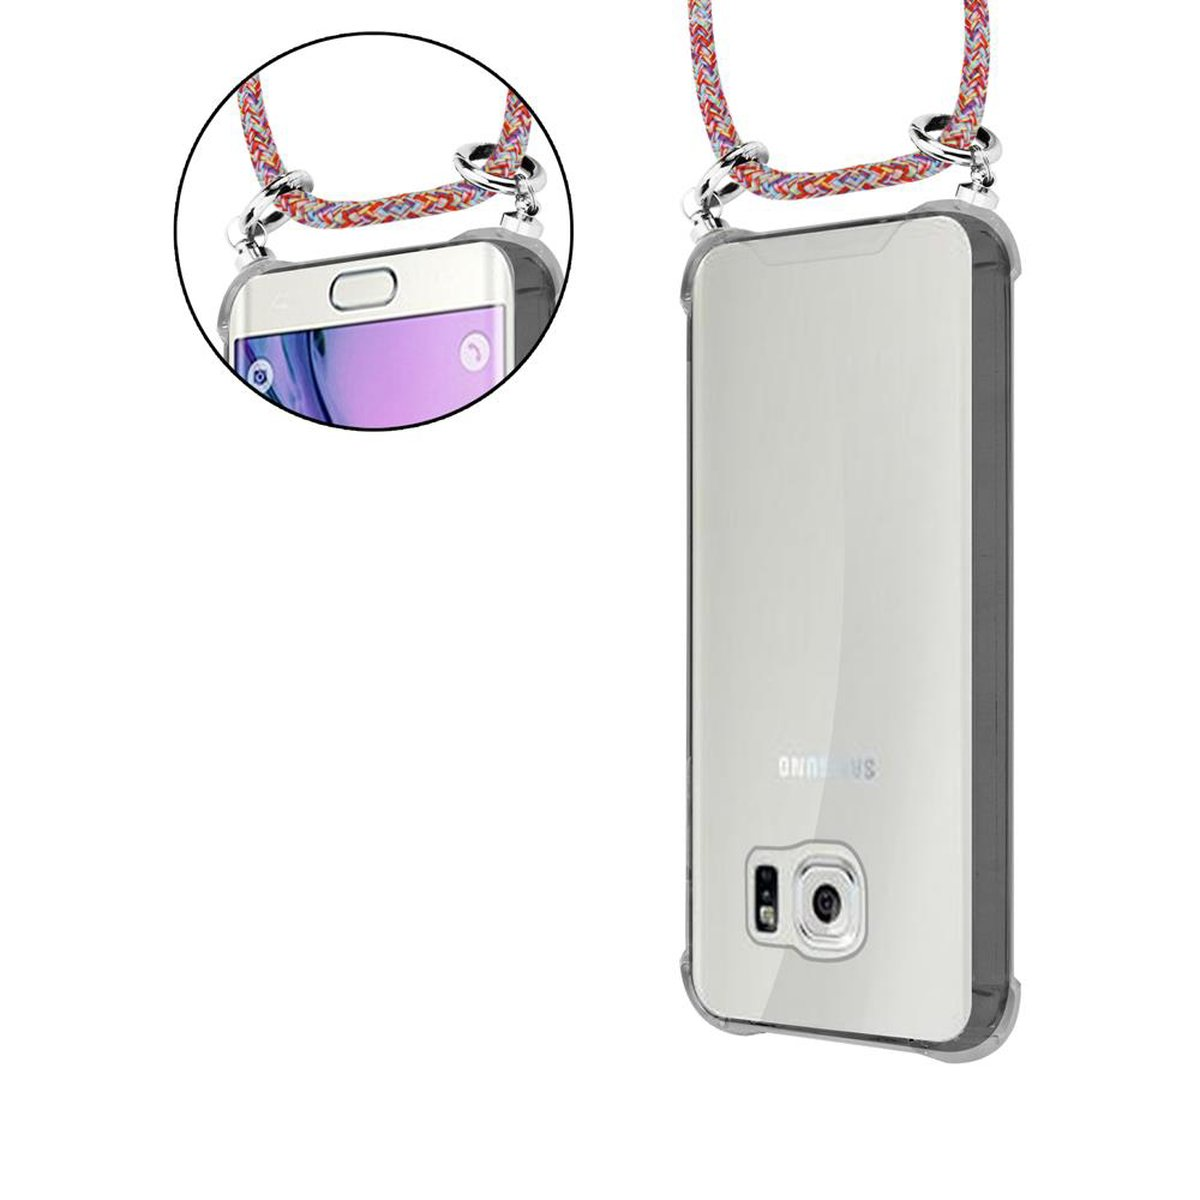 CADORABO und Galaxy Backcover, Handy S6, Samsung, Band Kette COLORFUL Silber PARROT abnehmbarer Hülle, mit Ringen, Kordel